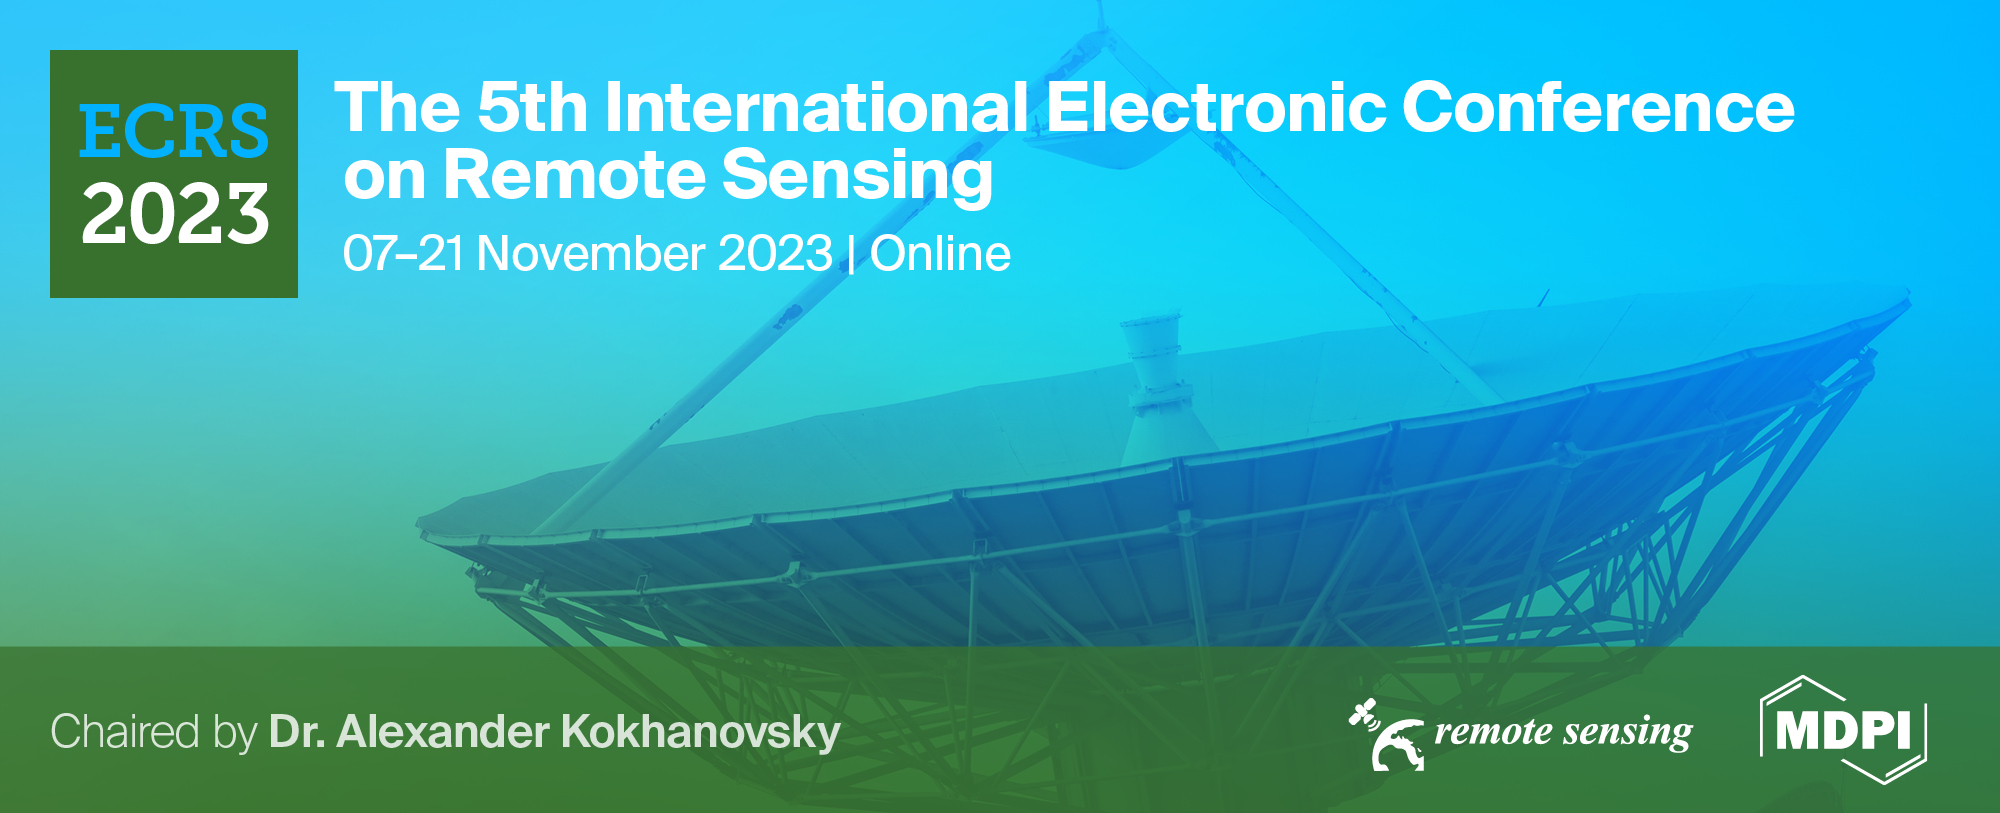 The 5th International Electronic Conference on Remote Sensing